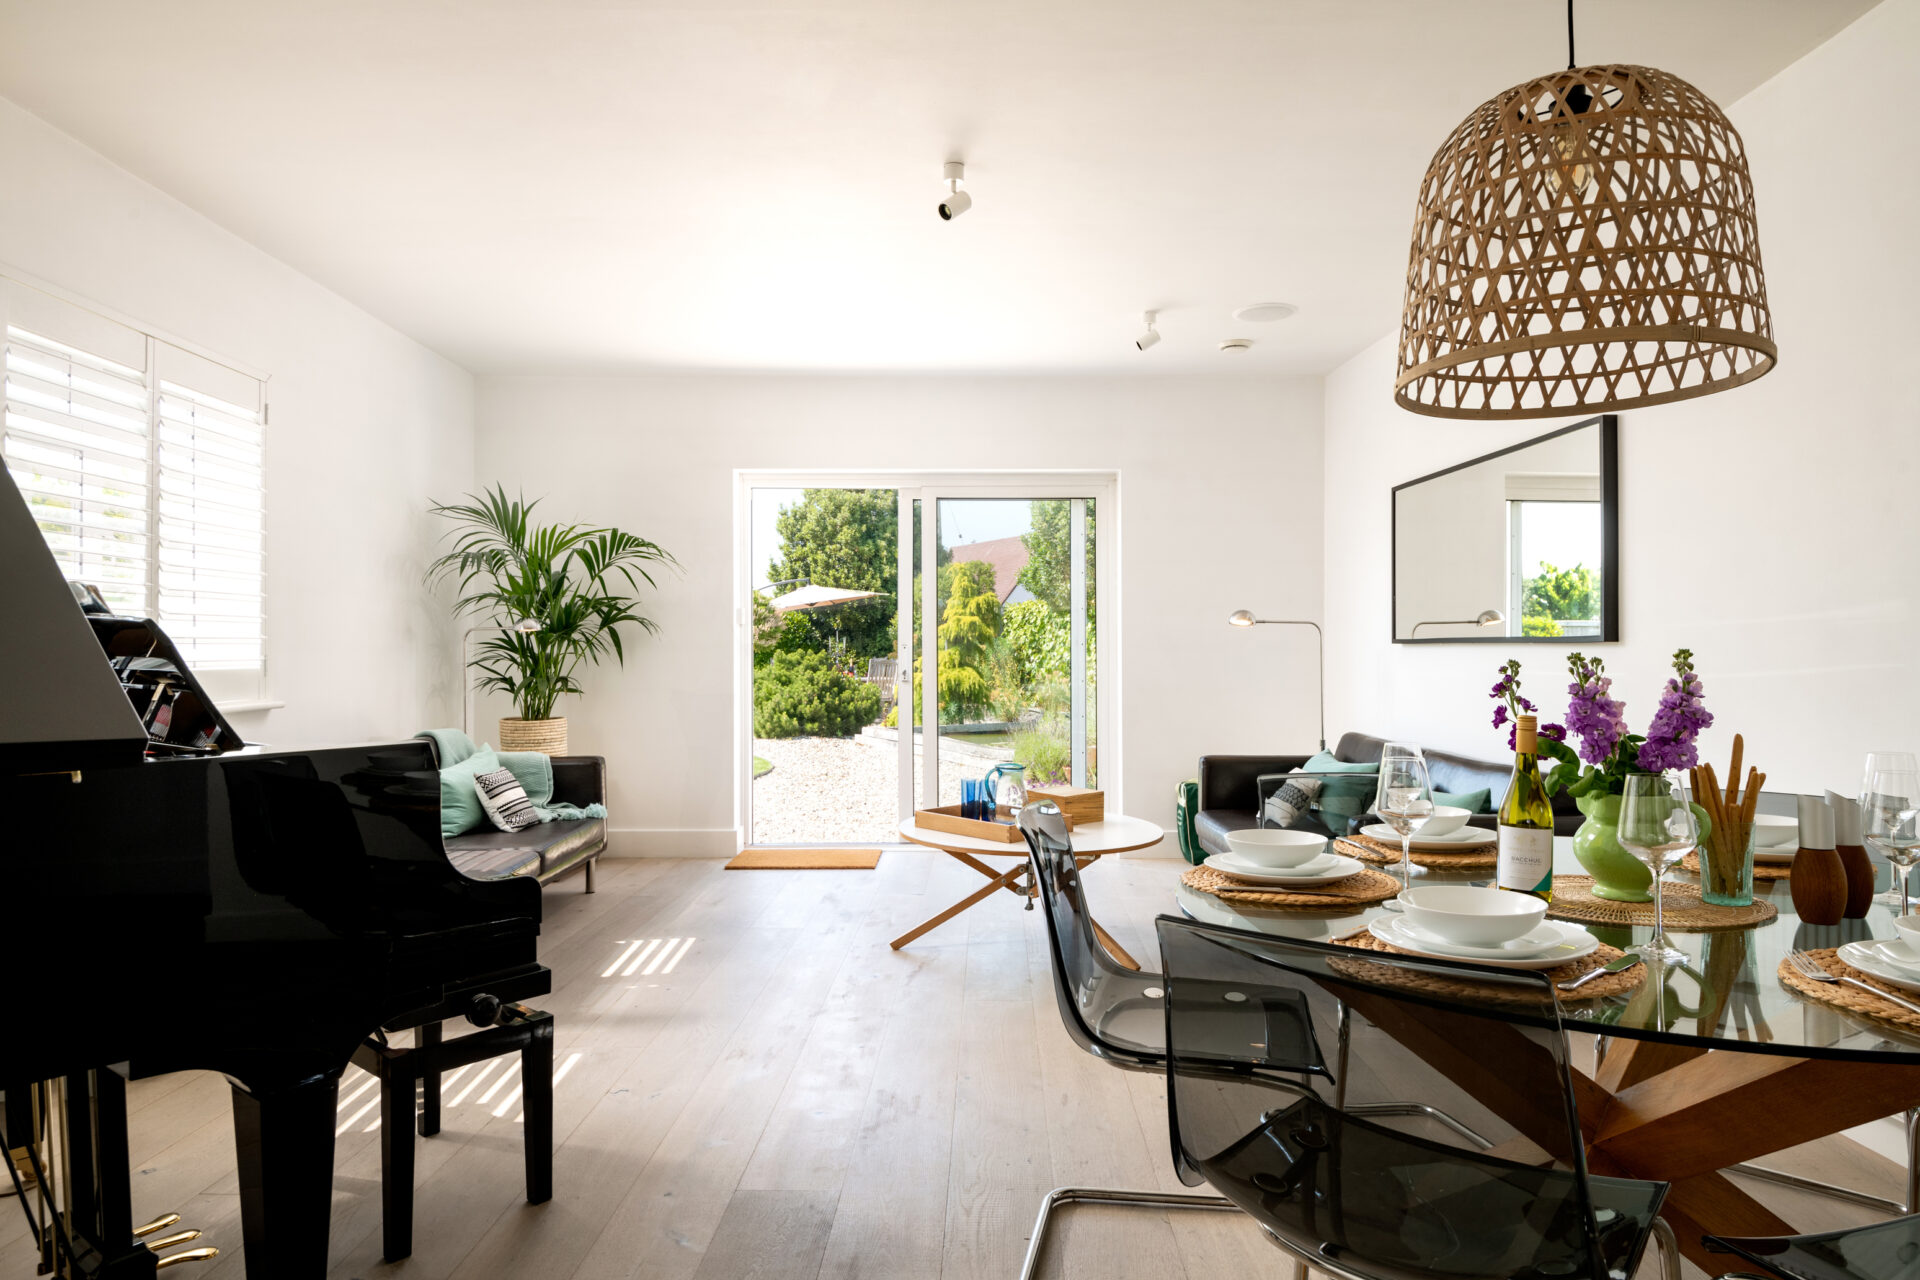 The Studio Holiday Cottage @ Pevensey Bay - Kawai GL10 Baby Grand Piano & Dining area